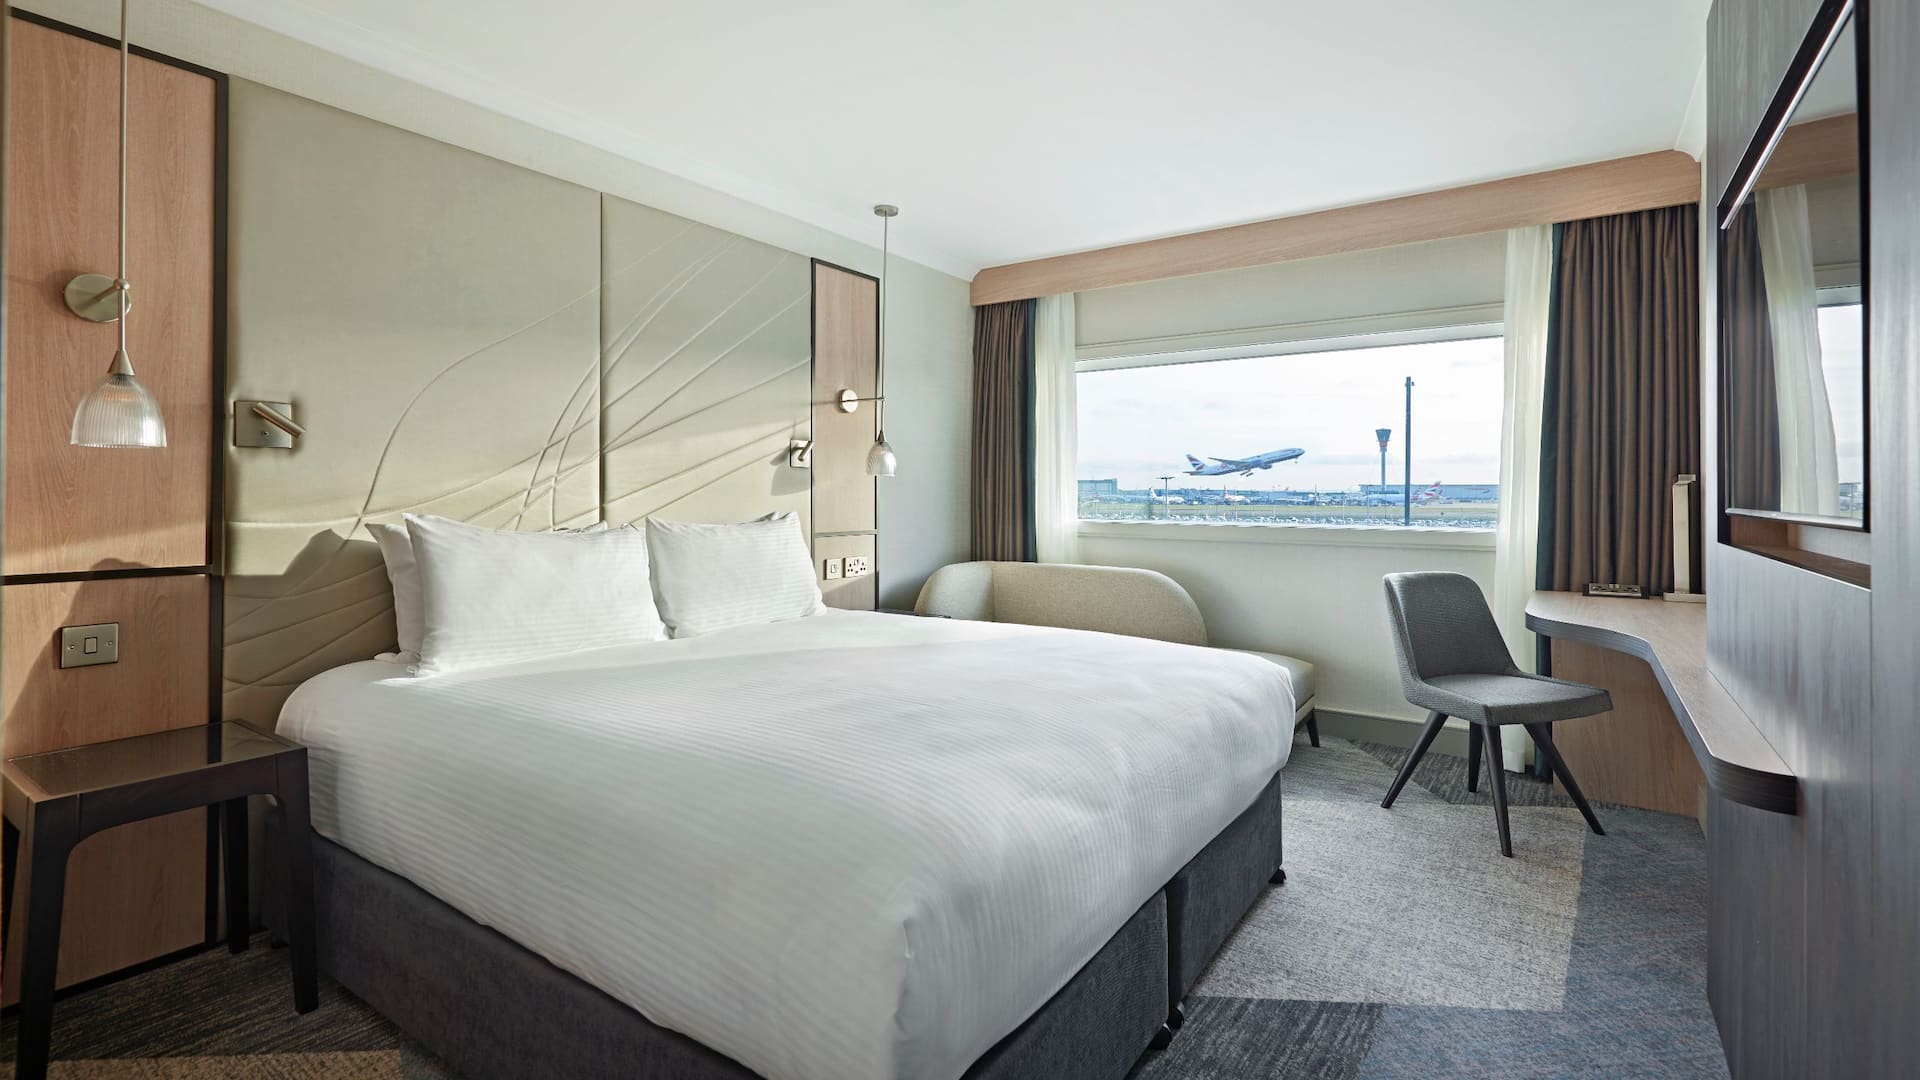 Bedroom overlooking a plane taking off at Heathrow airport